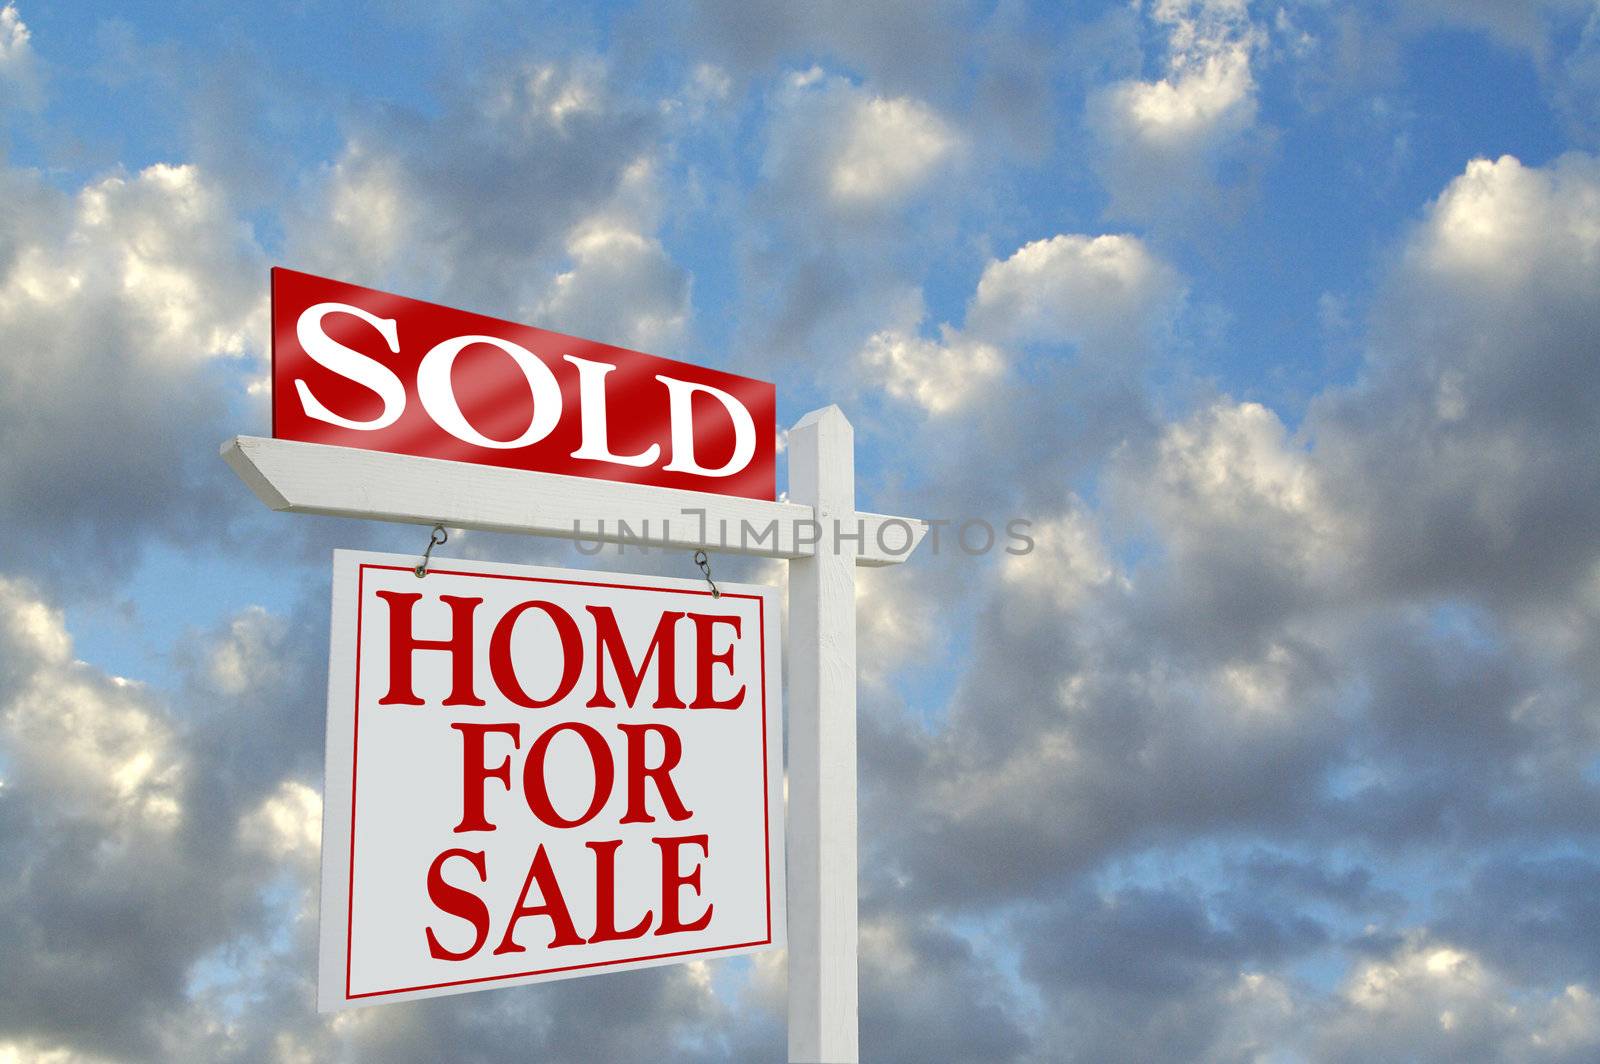 Sold Home For Sale Sign by Feverpitched